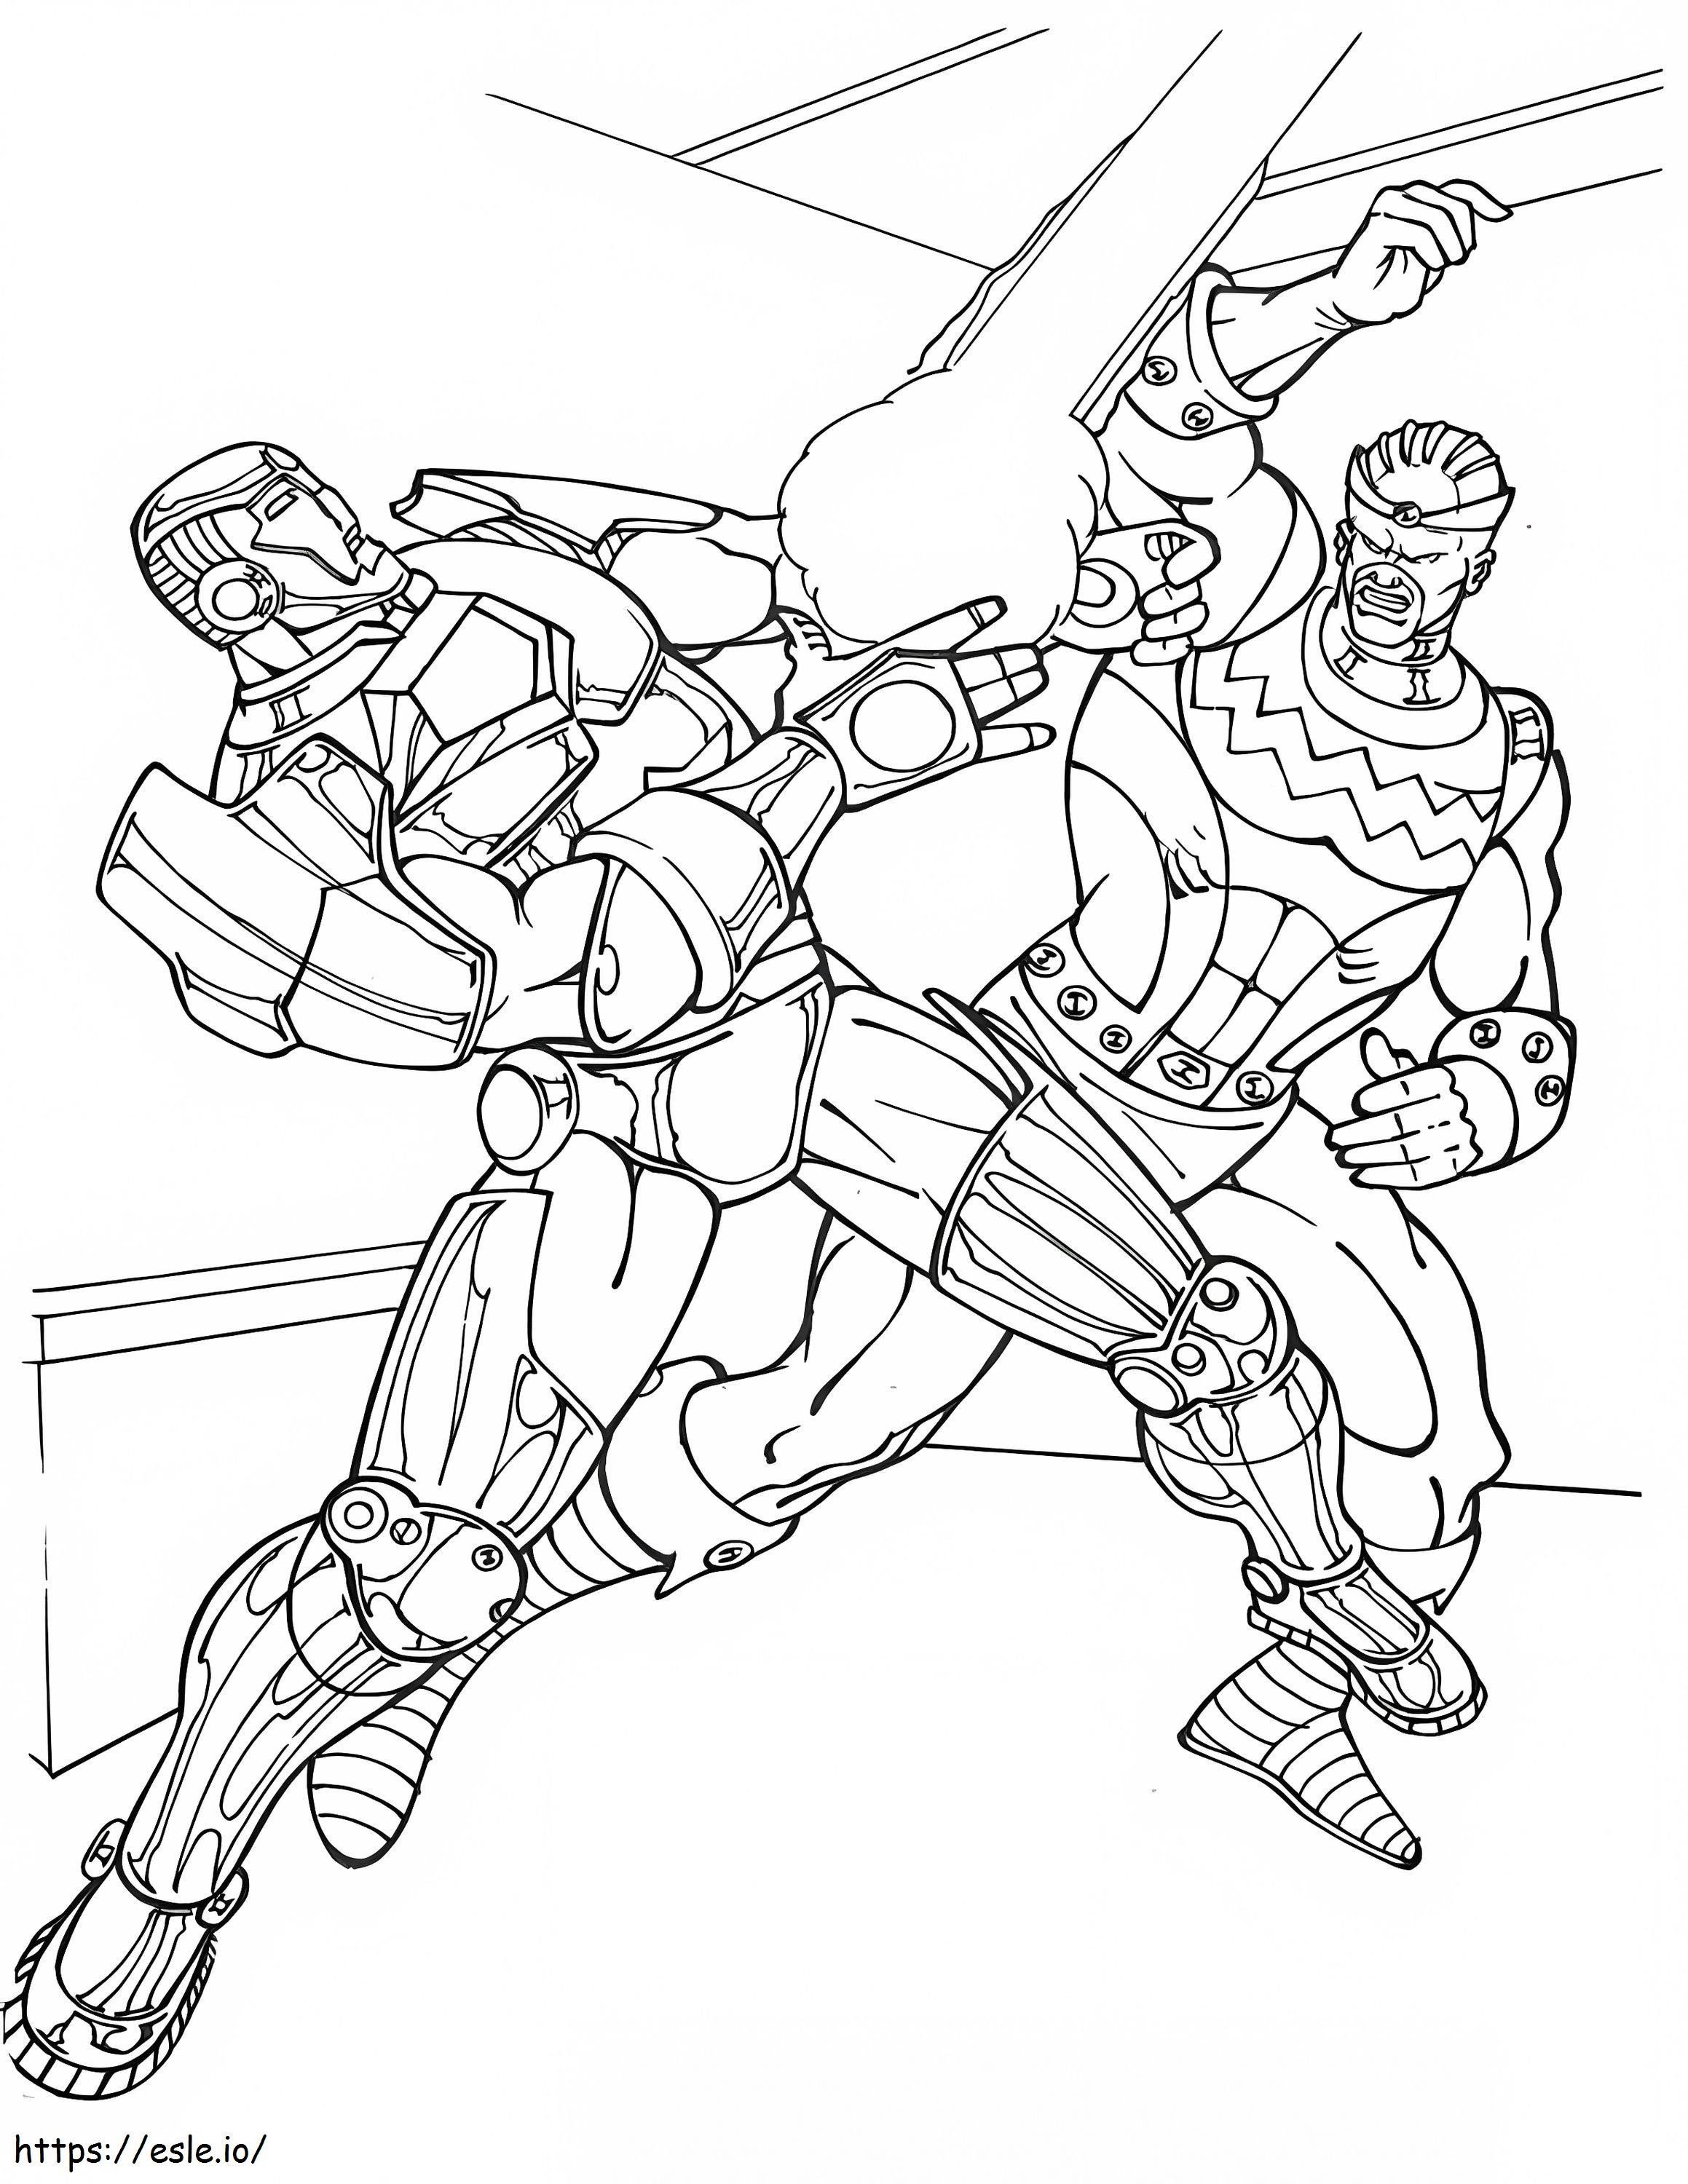 Iron Man And Villain coloring page